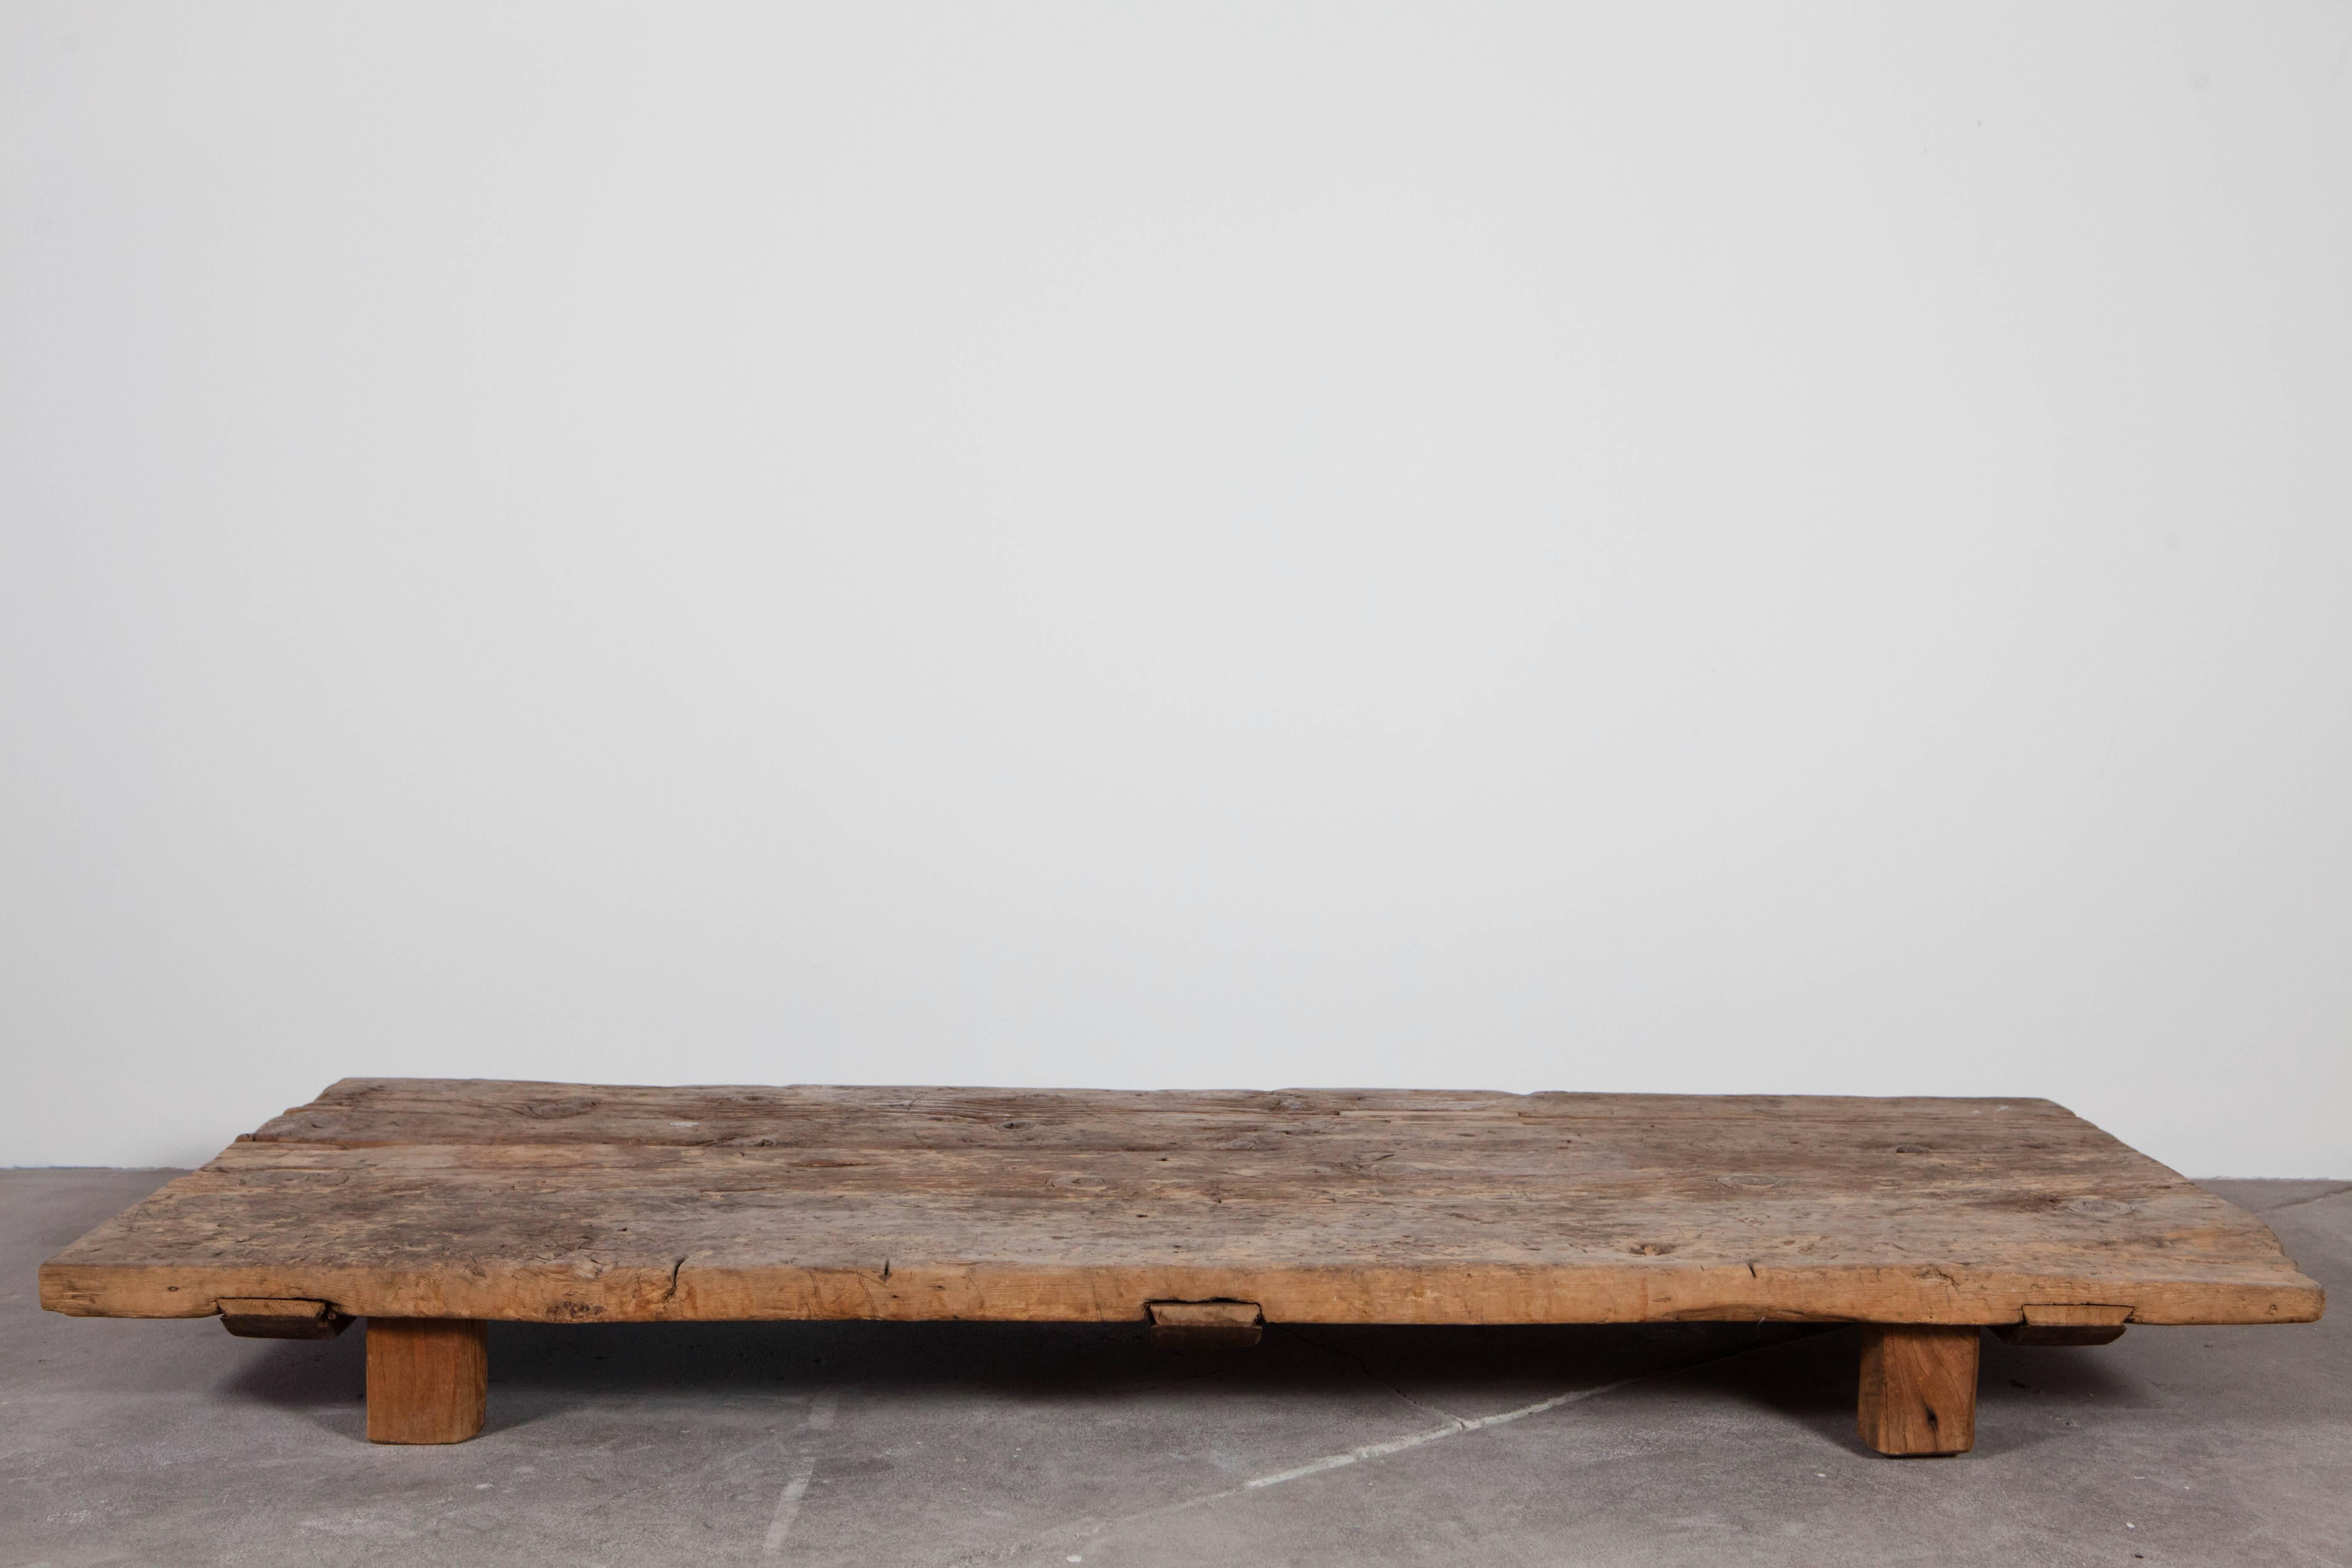 Exceptional low coffee table in distressed and marred planks of wood.